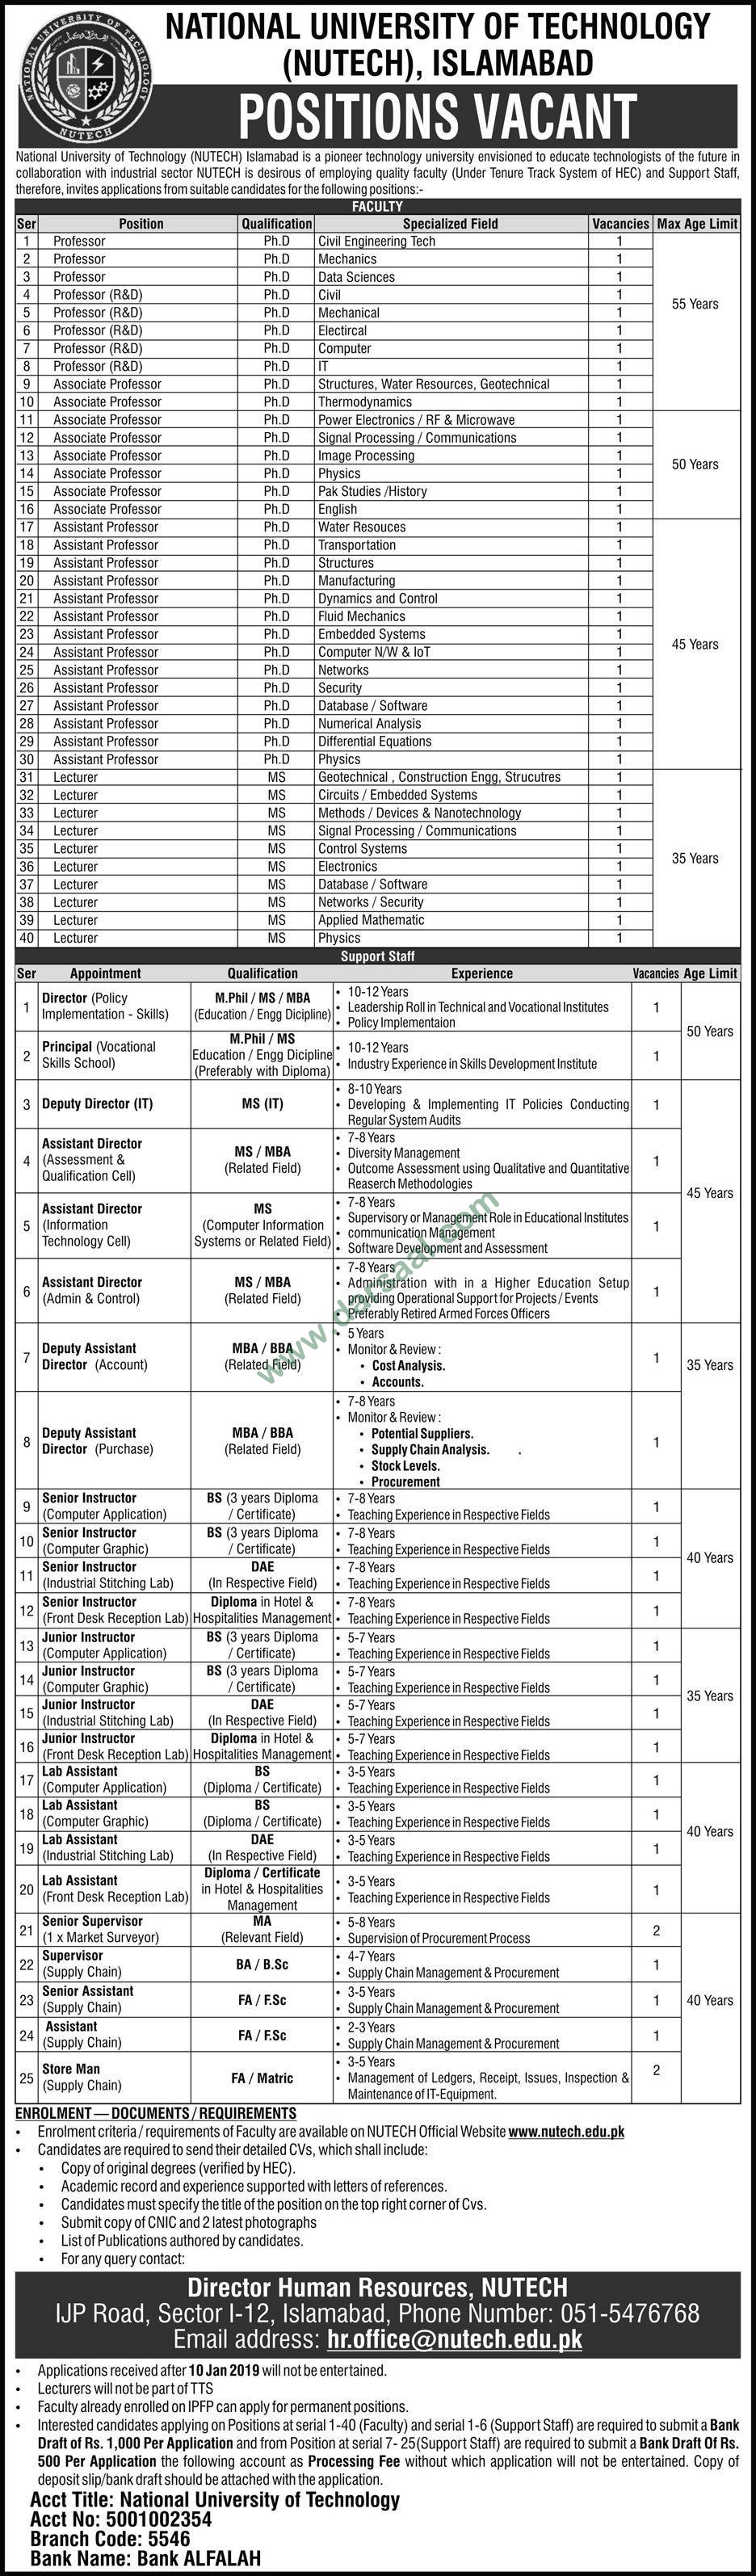 Instructor Jobs in National University of Technology in Islamabad - Dec 24, 2018